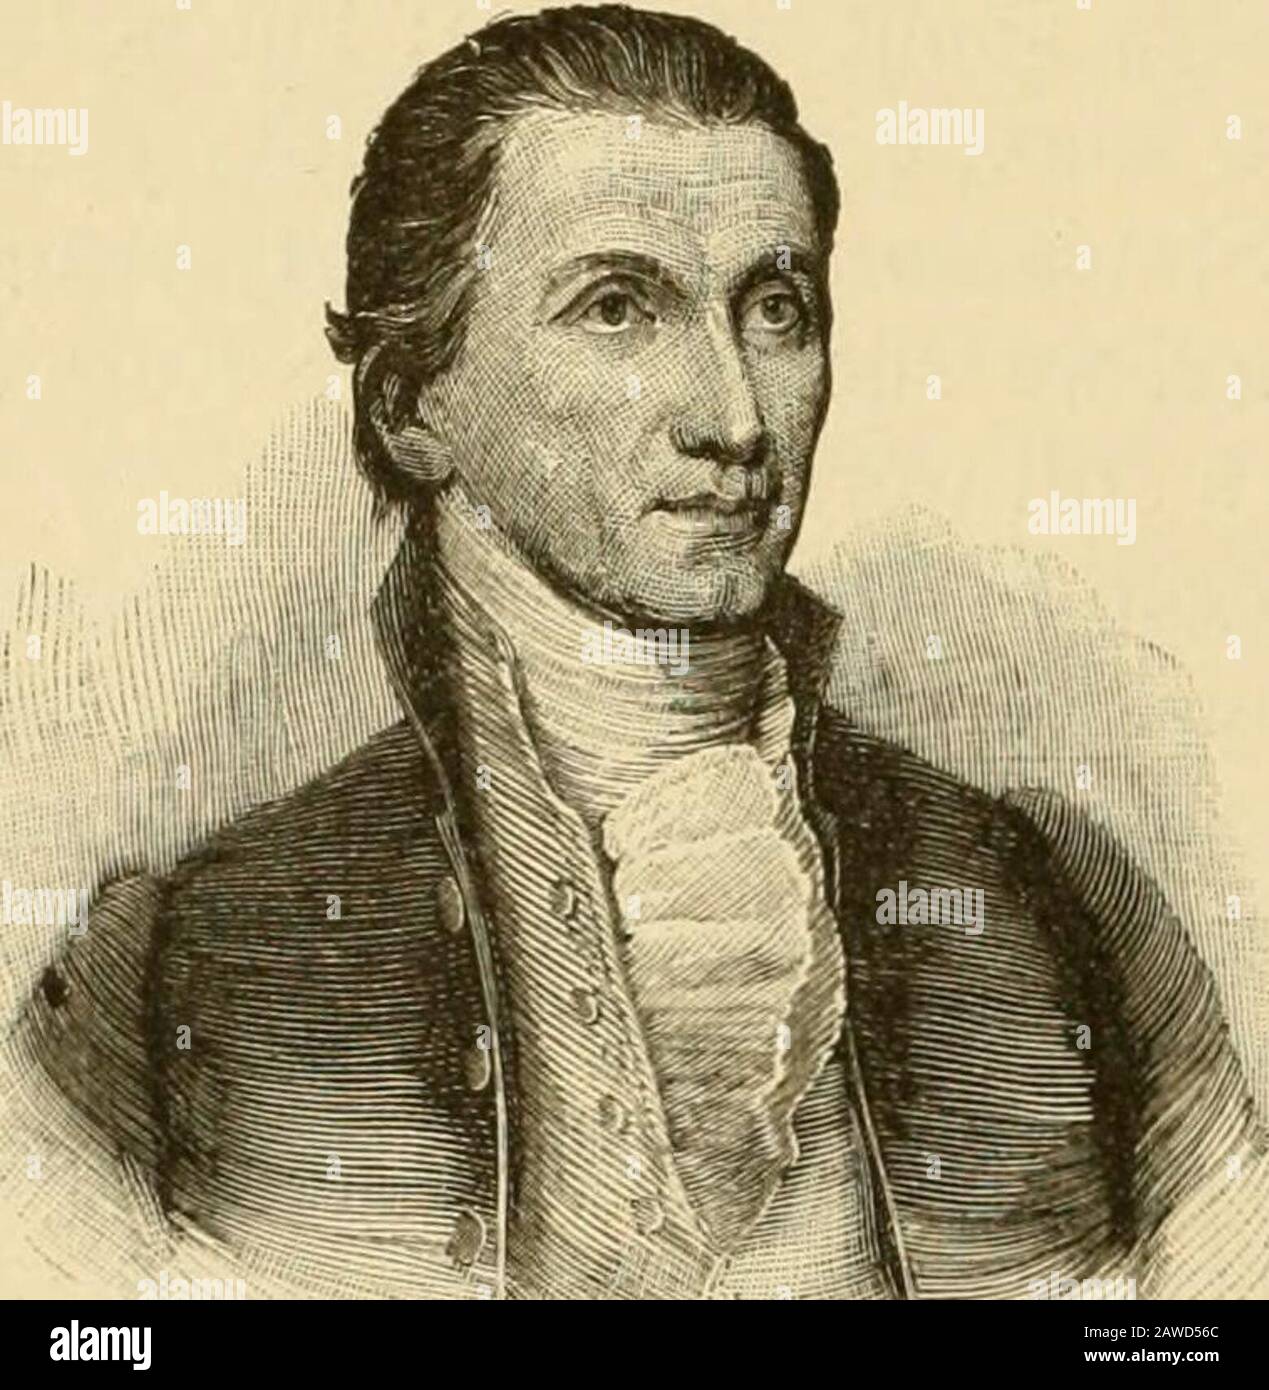 A history of the United States for schools . irit grew, such threats fellTheeiec- into disfavor. The Hartford Convention killedI8i6°and ^^^ Federalist party. In 1816, their candidate,1820. Rufus King, received only 34 electoral votes against 187 for the Republican candidate, James Mon-roe. In 1820, the Federalists put no candidate into thefield, and Monroes reelection was practically unanimous.Since the two elections of George Washington, that ofJames Monroe, in 1820, is the only one in which there has been no opposingcandidate. His presi-dency was, therefore,called the era ofgood feeling. For Stock Photo